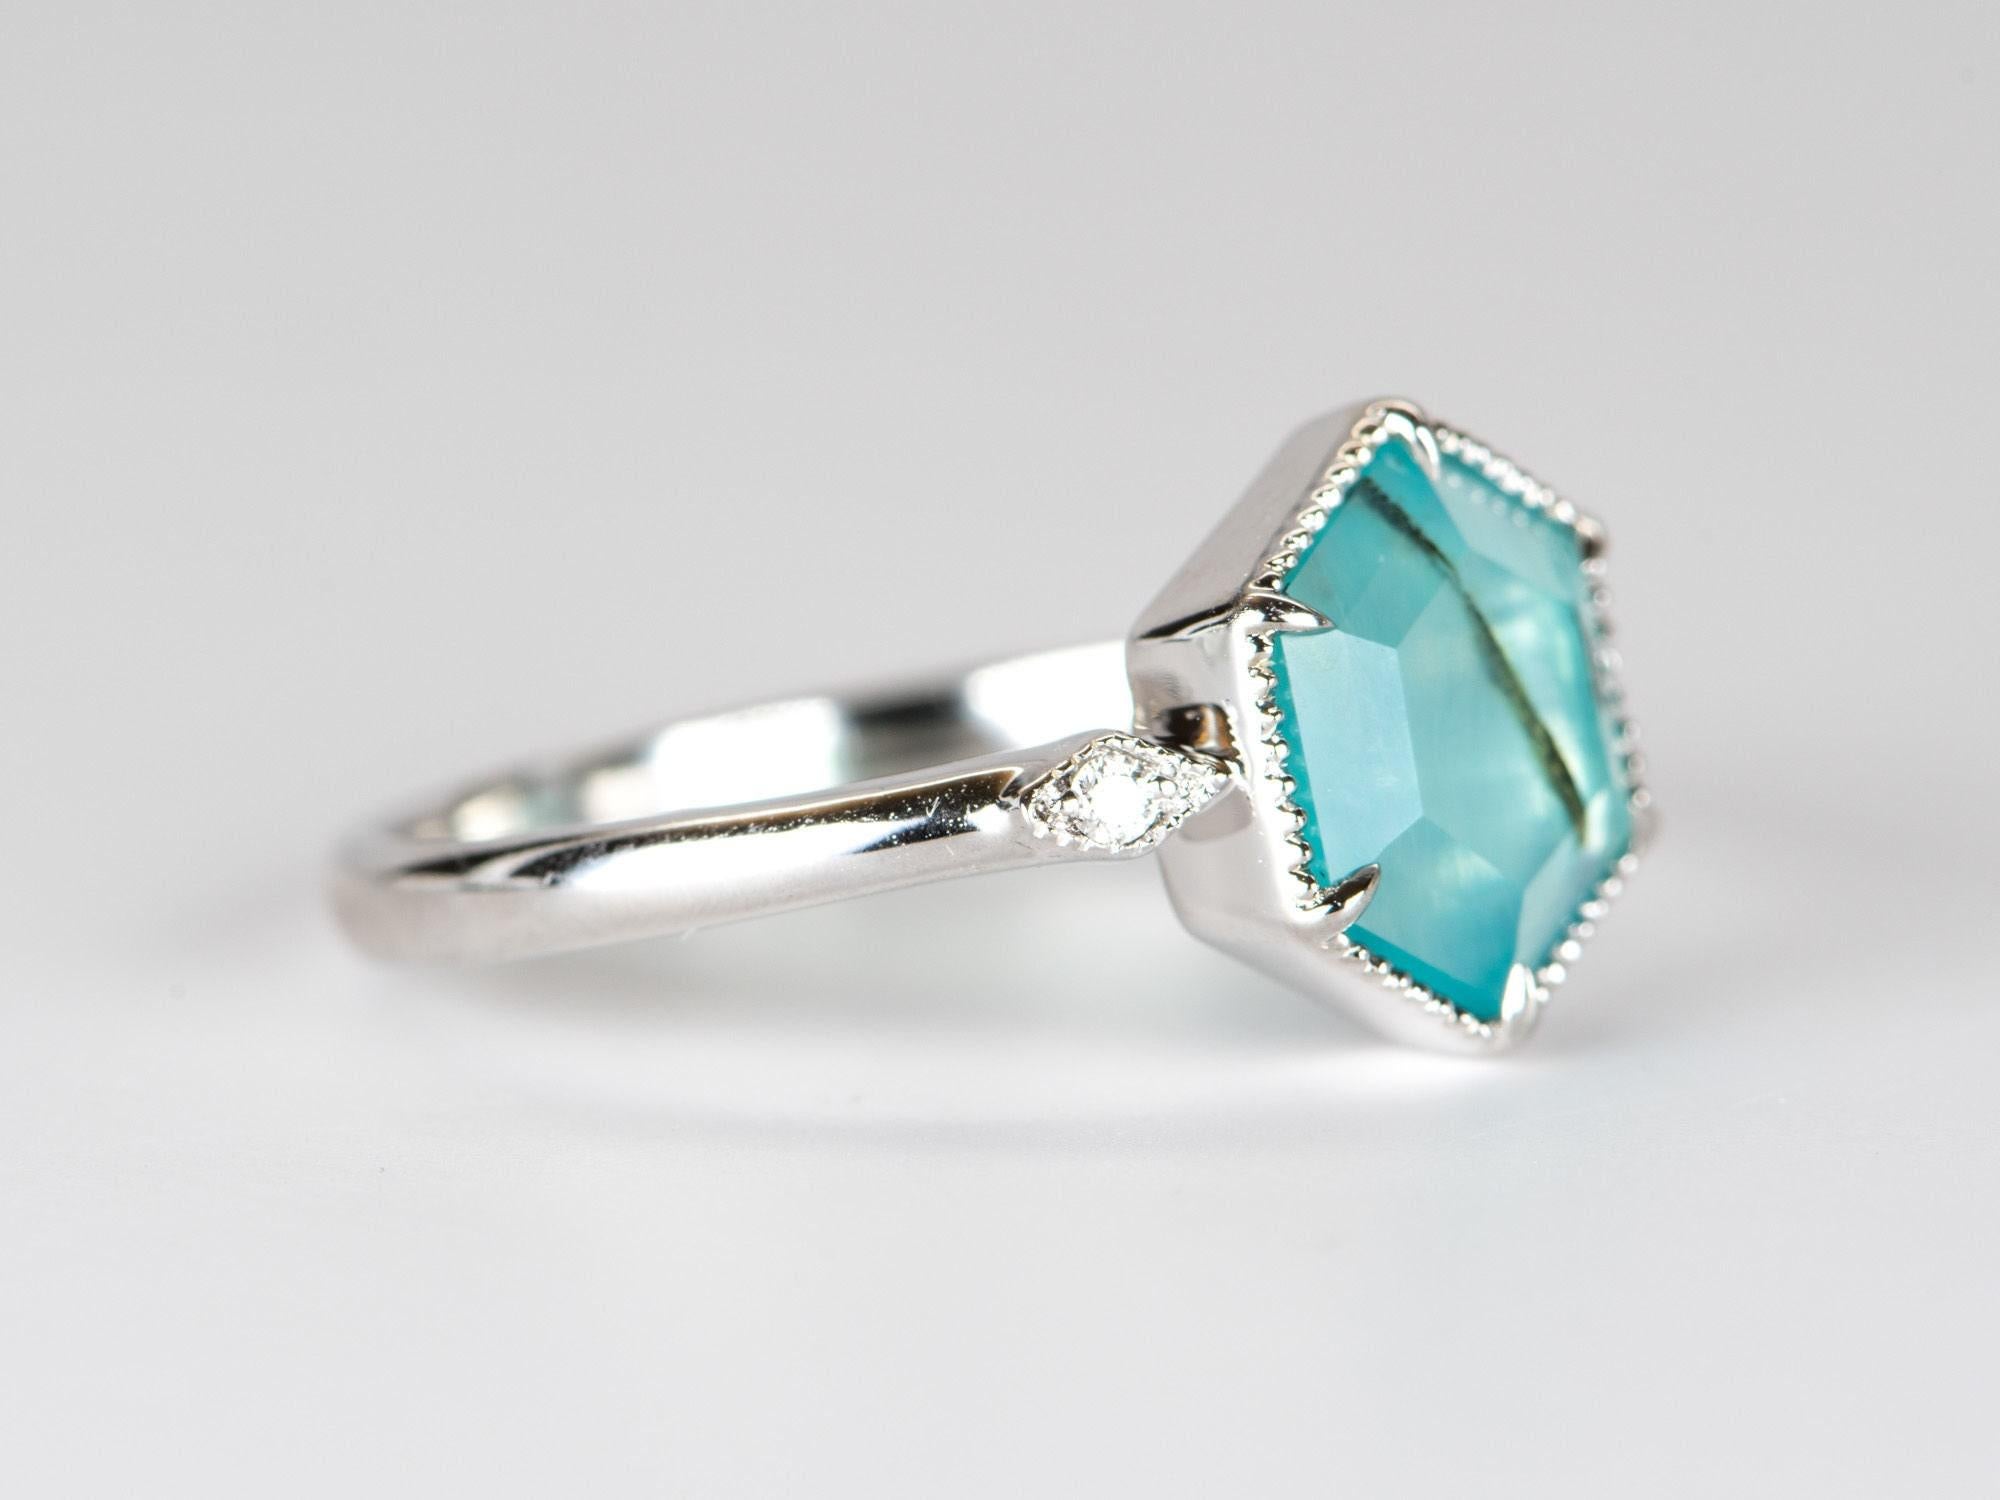 ♥ 1.5ct Hexagon Peruvian Blue Opal with Diamond Sides 14K White Gold Engagement Ring
♥ Solid 14k white gold ring set with a beautiful hexagon-shaped opal
♥ Gorgeous blue green color!
♥ The item measures 10.6 mm in length, 9.3 mm in width, and stands